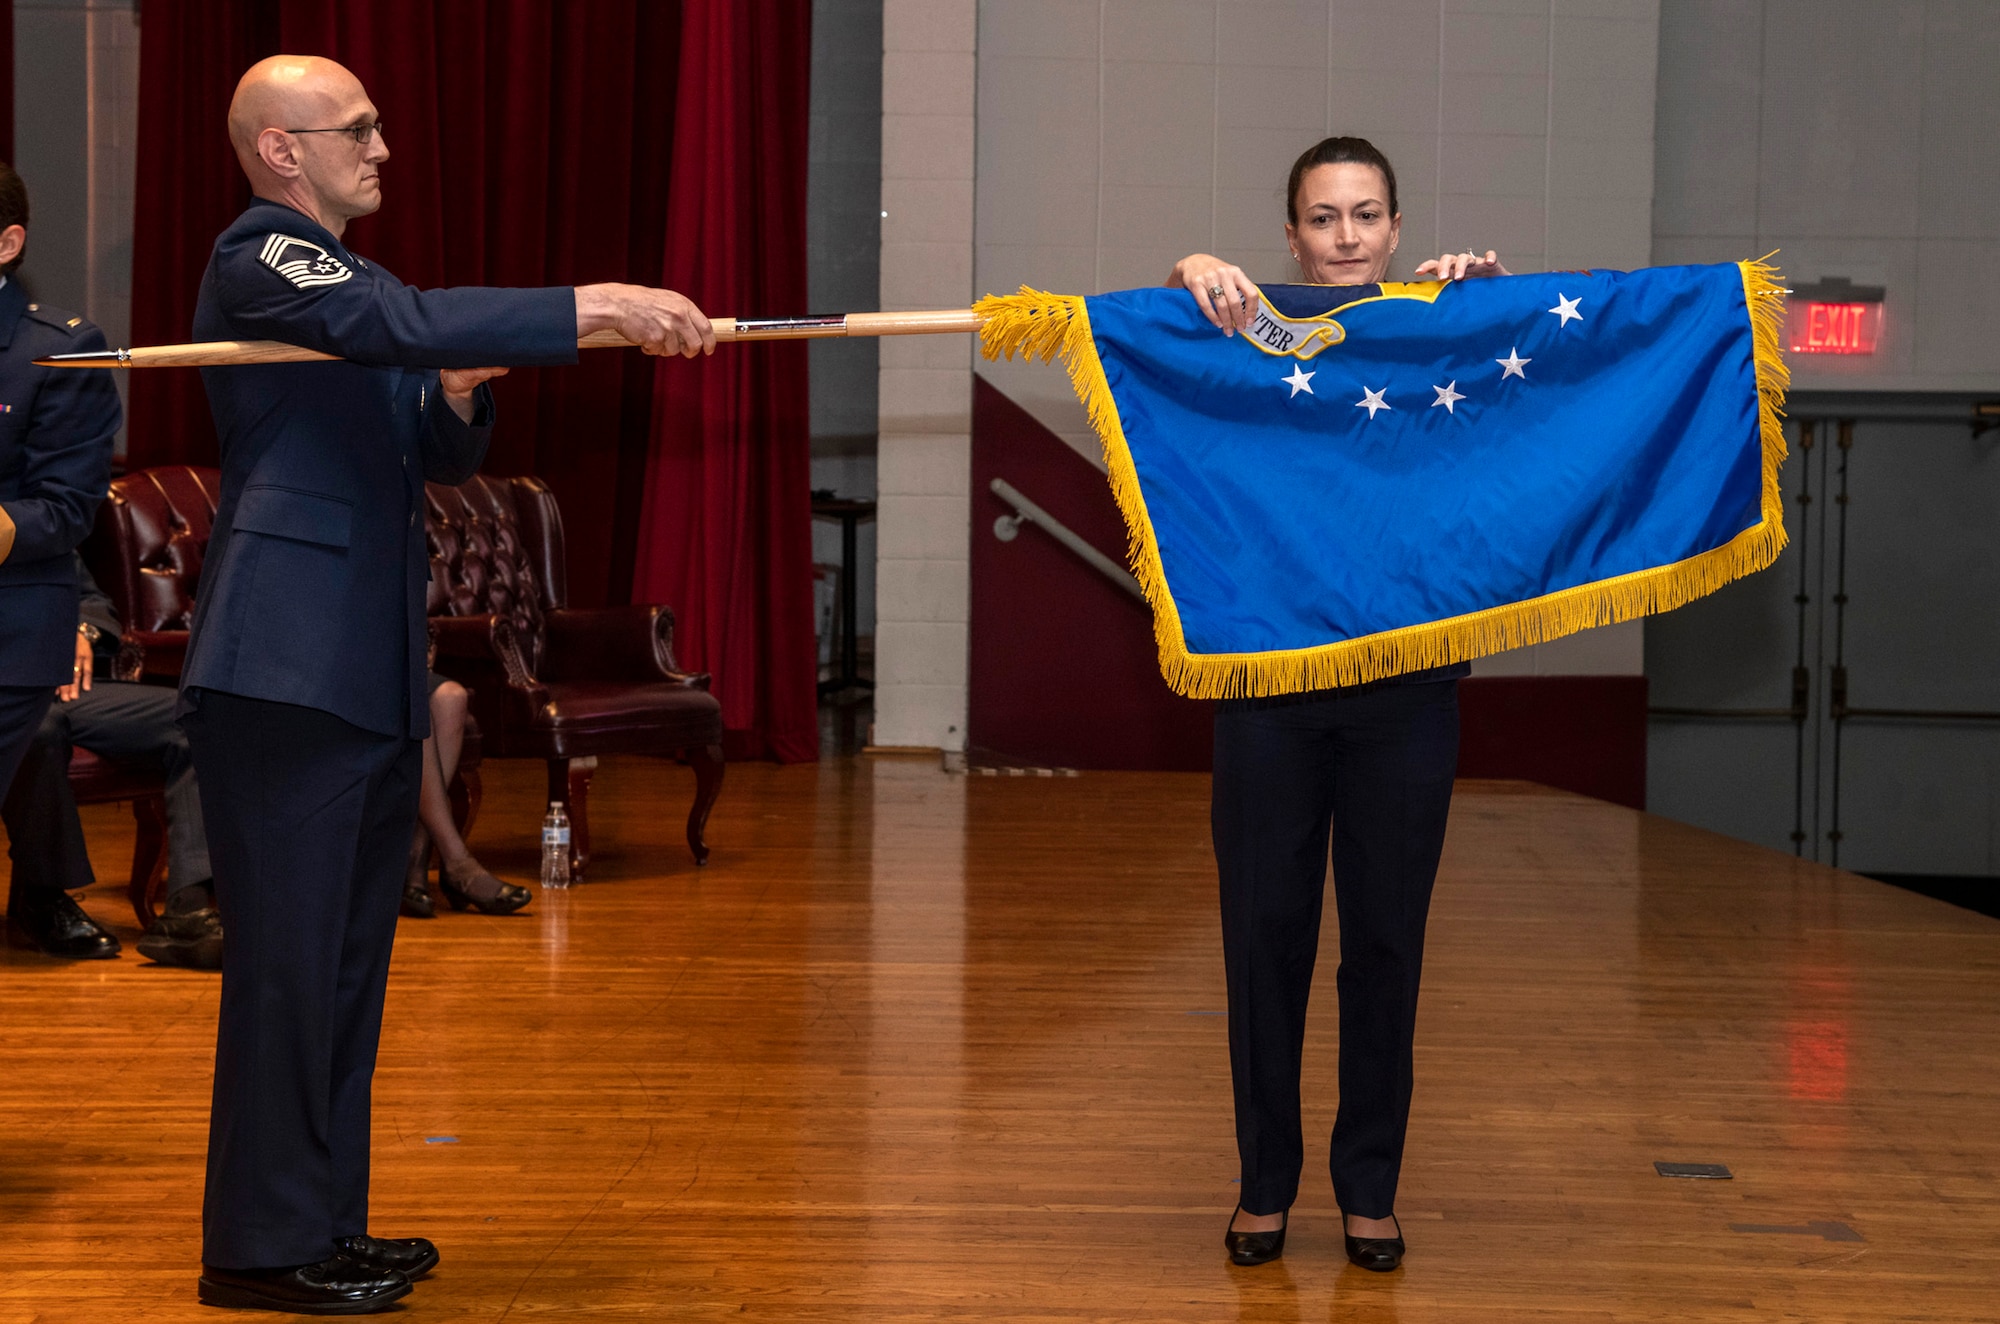 Col. Donna Turner, commander of the newly named Air Force Services Center, unfurls her unit's new flag at a special ceremony June 25, 2019, on Joint Base San Antonio-Lackland, Texas. The Air Force Installation and Mission Support Center formally redesignated AFSVC and the Air Force Installation Contracting Center-- two of its primary subordinate units -- to bring them in line with Air Force naming conventions. (U.S. Air Force photo by Johnny Saldivar)